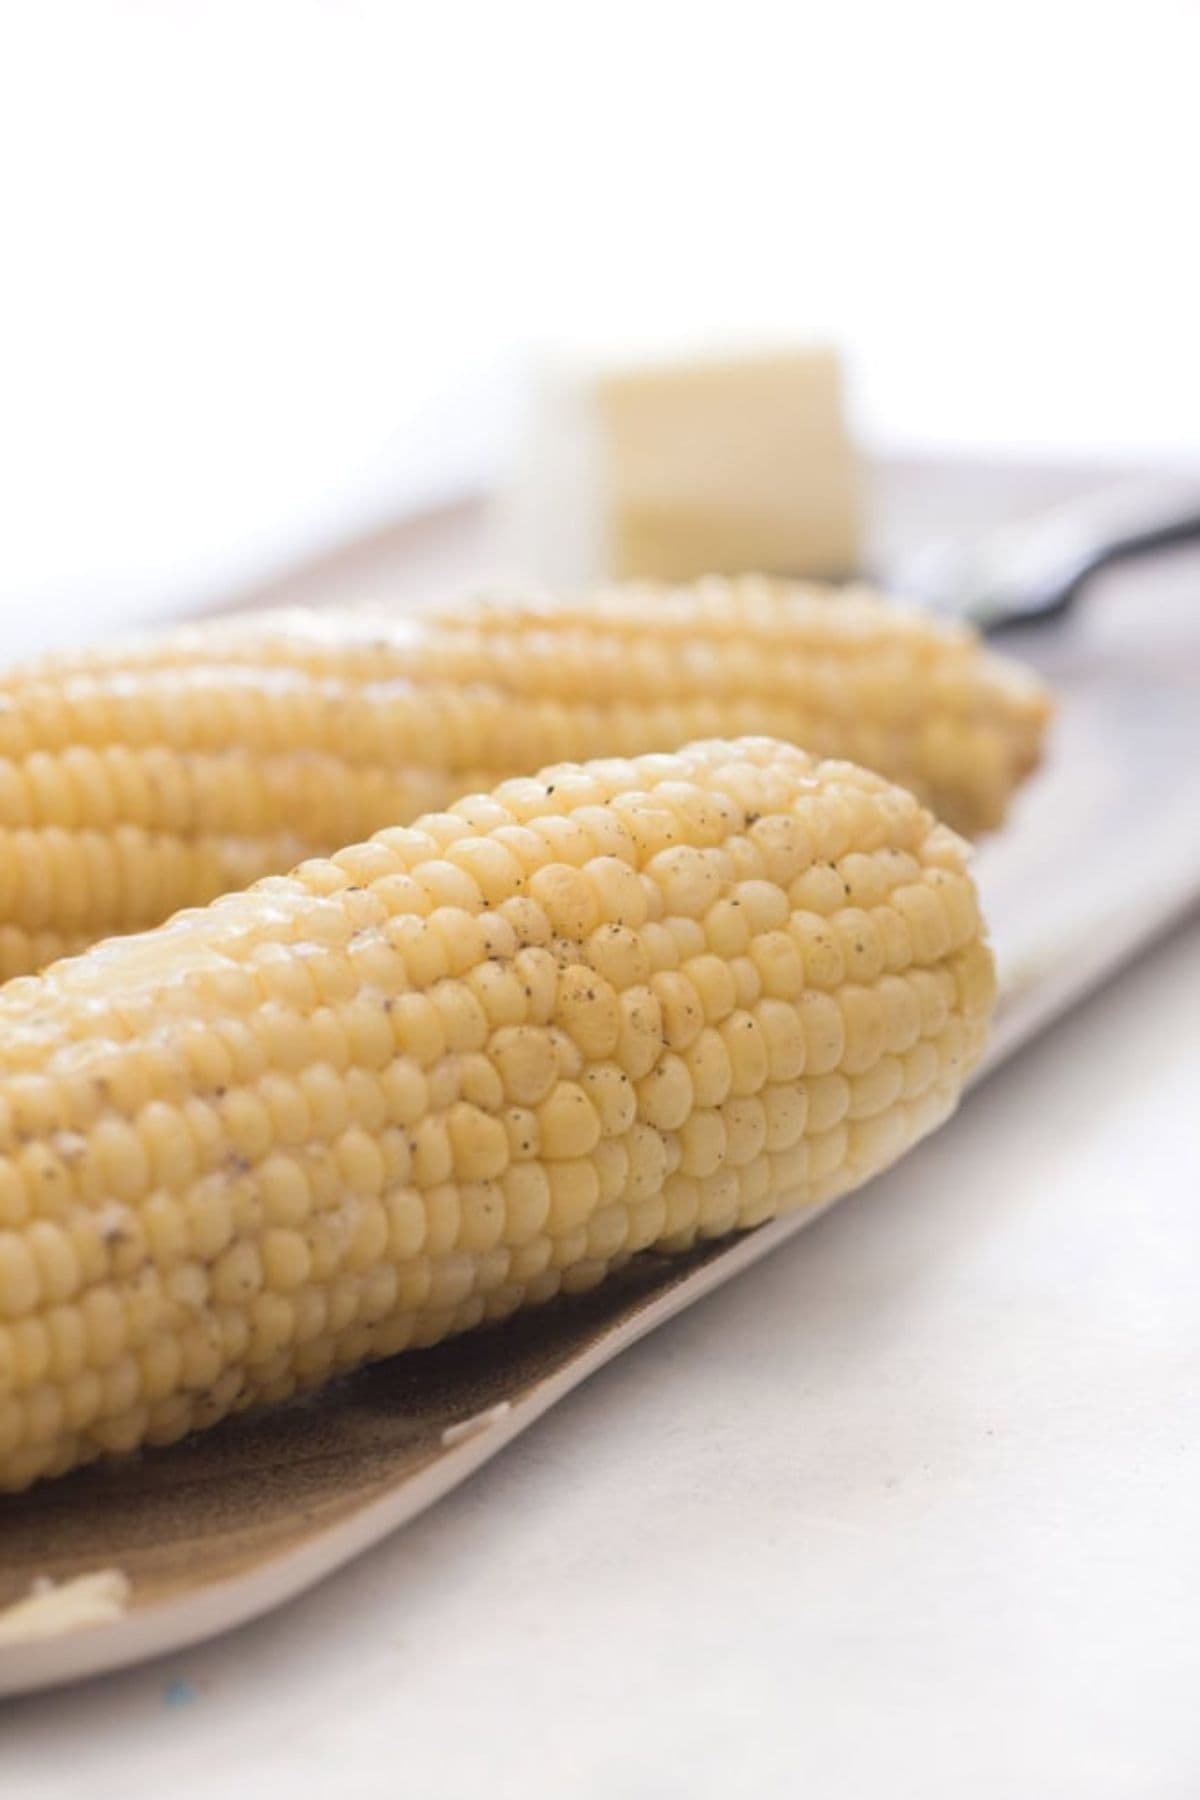 Slow Cooker Corn On The Cob